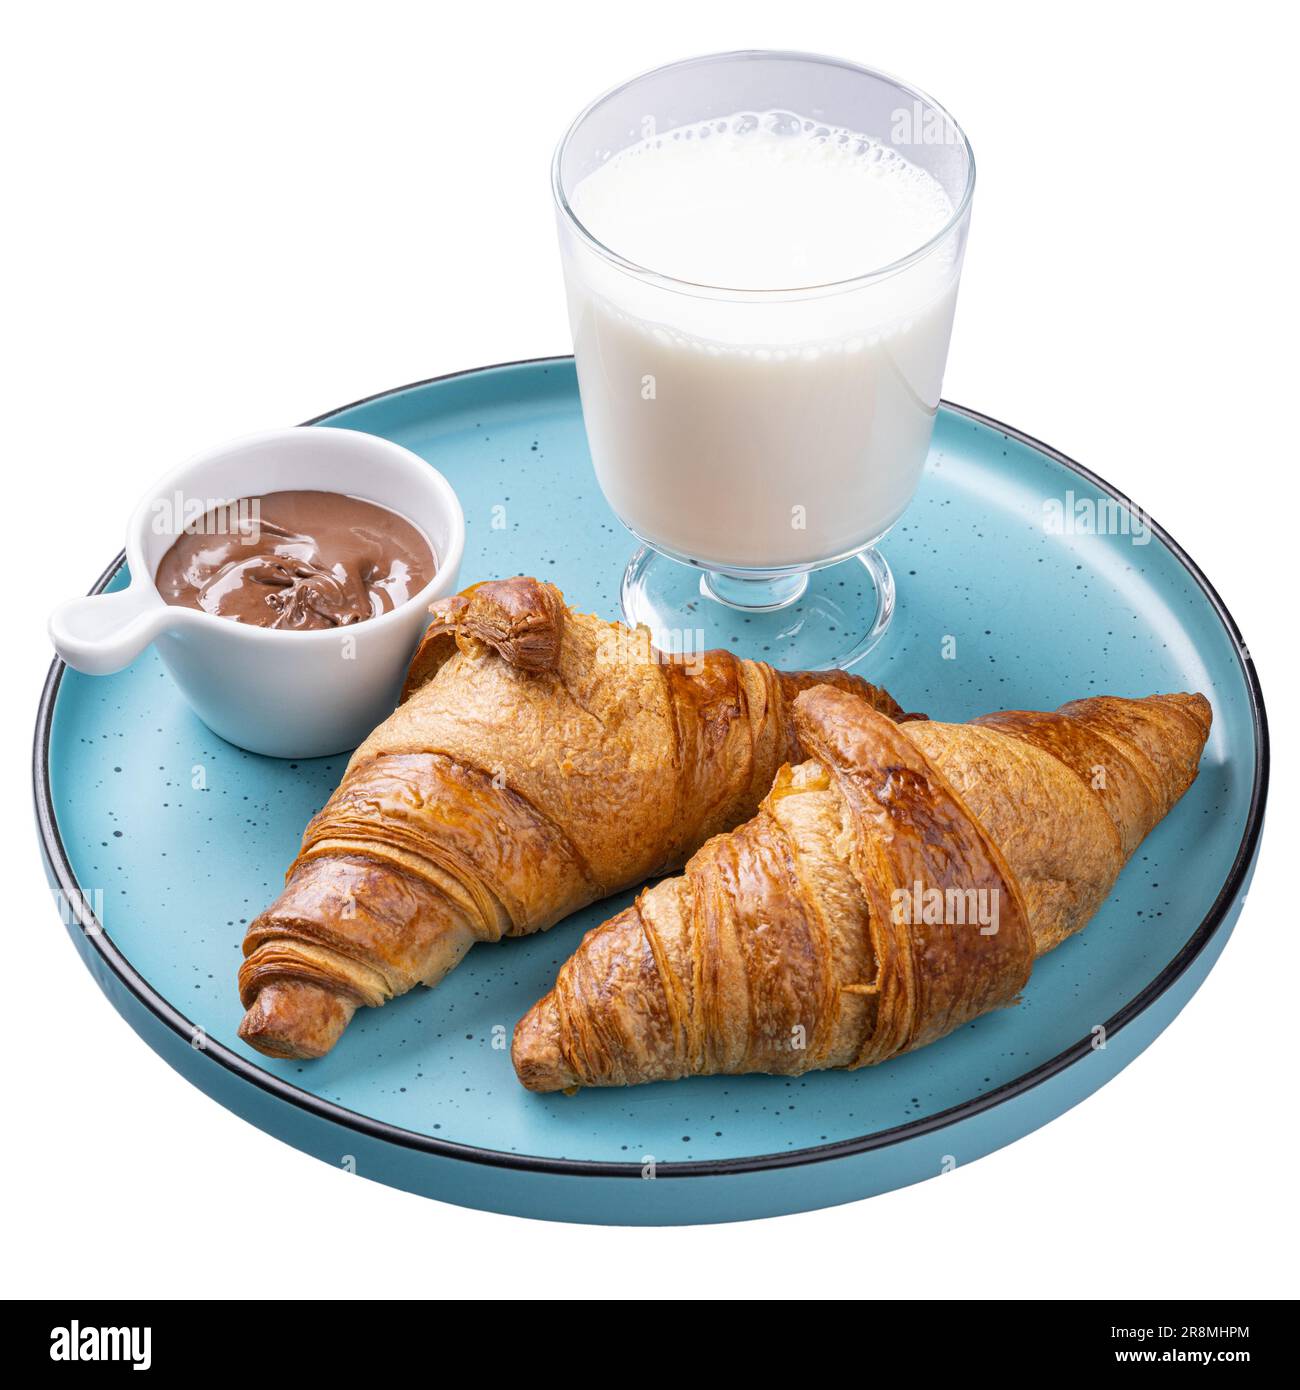 Croissant with chocolate spread and milk, restaurant sweet breakfast menu concept Stock Photo